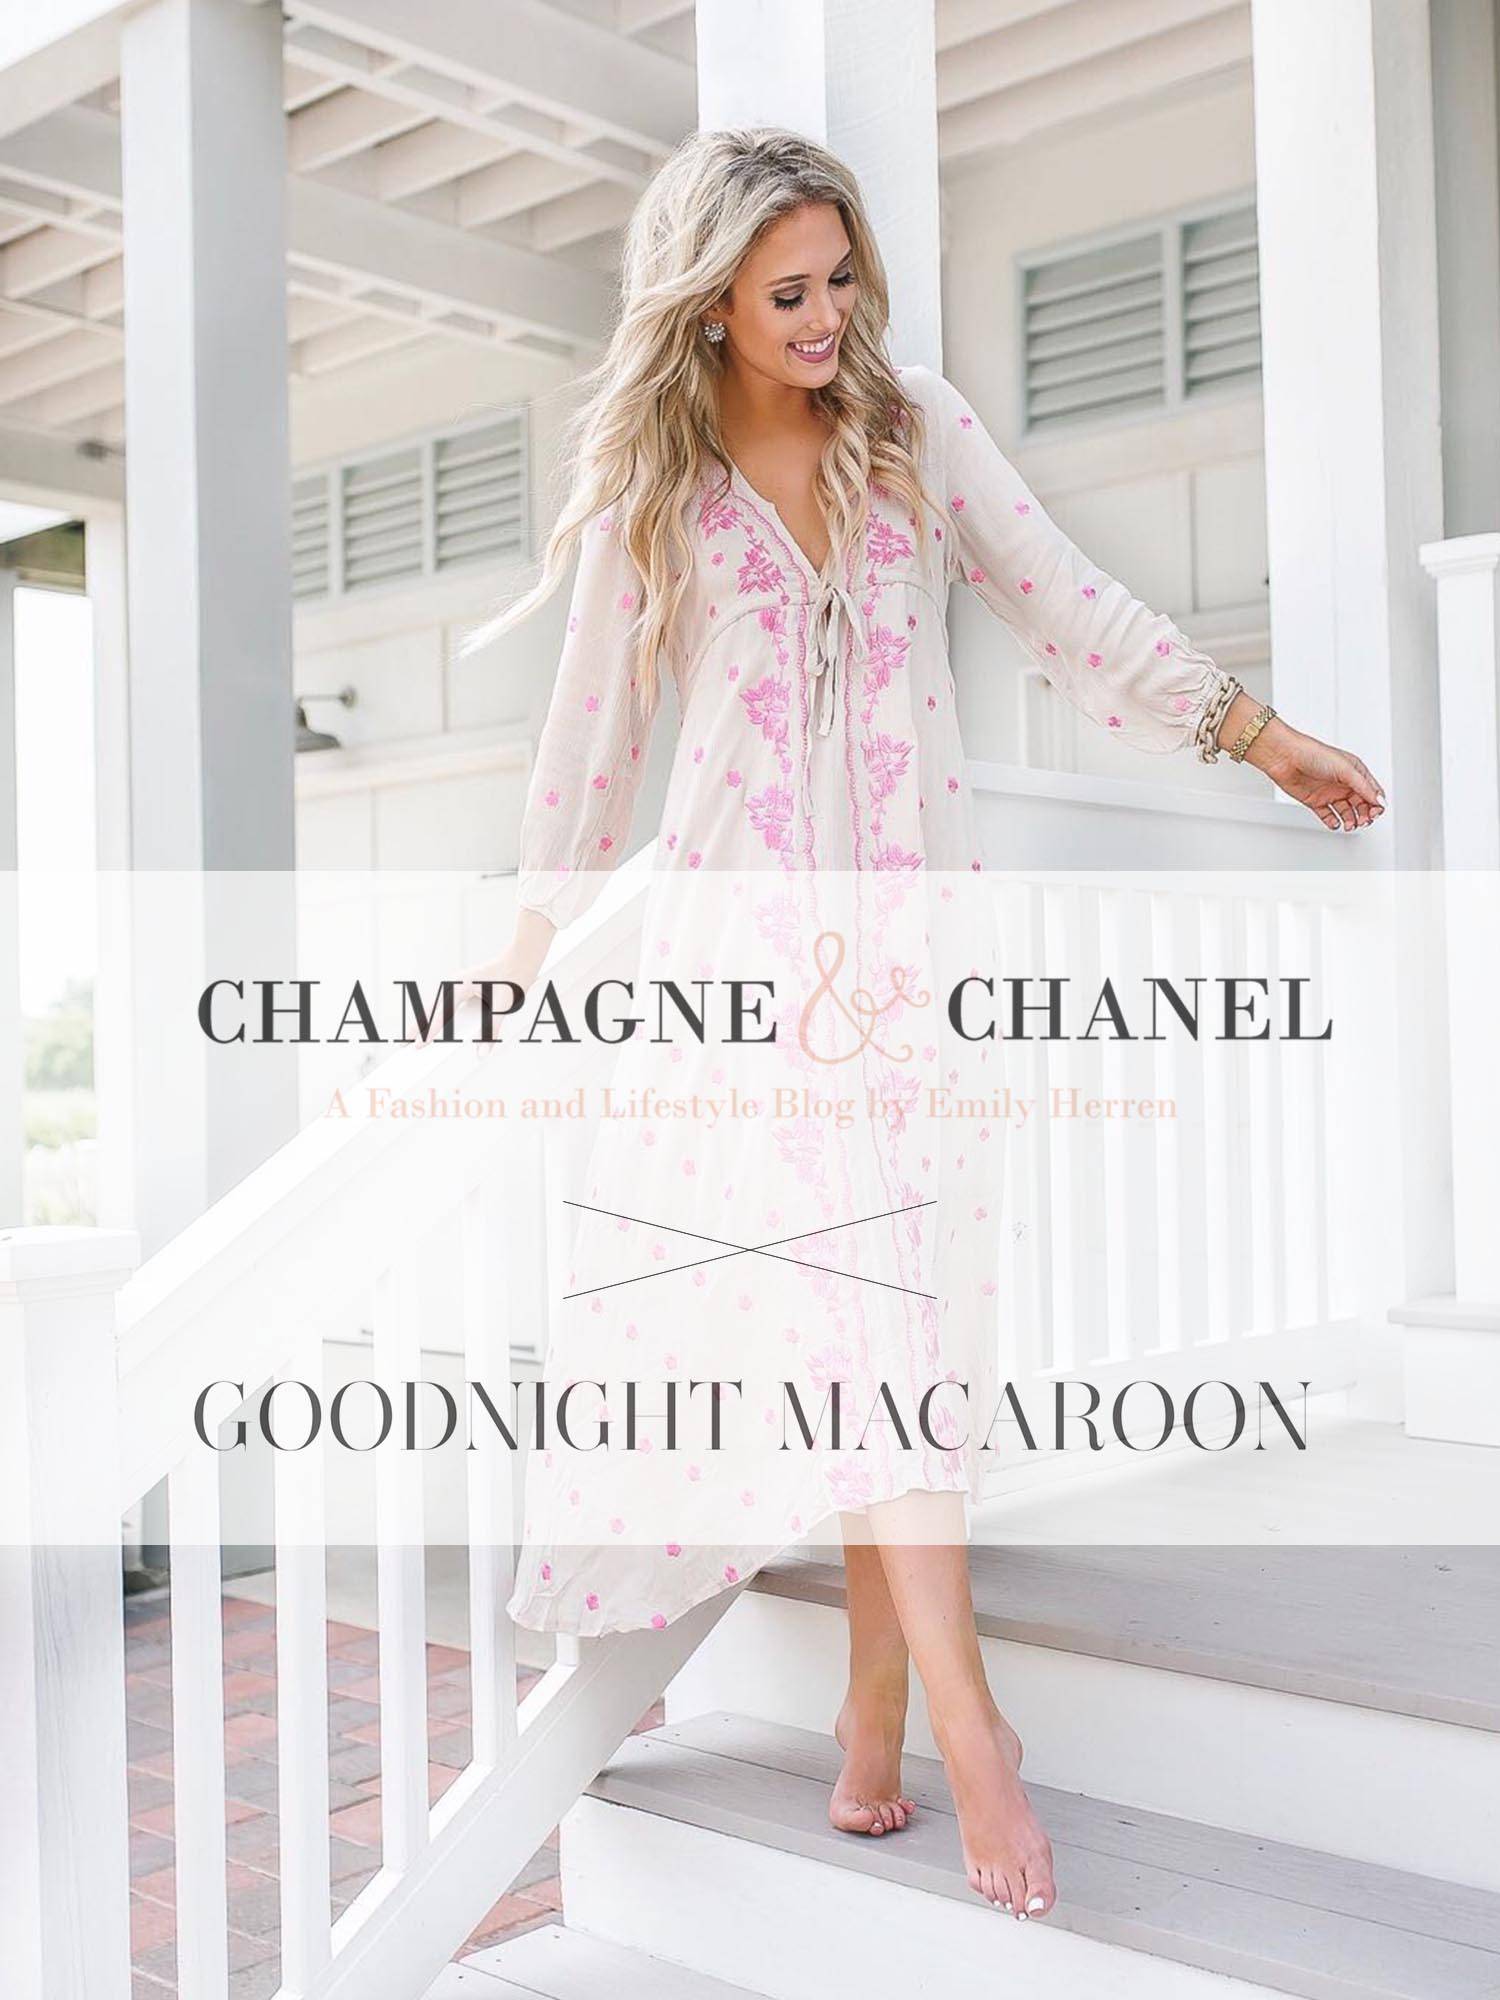 Champagne & Chanel – A Fashion and Lifestyle Blog by Emily Herren